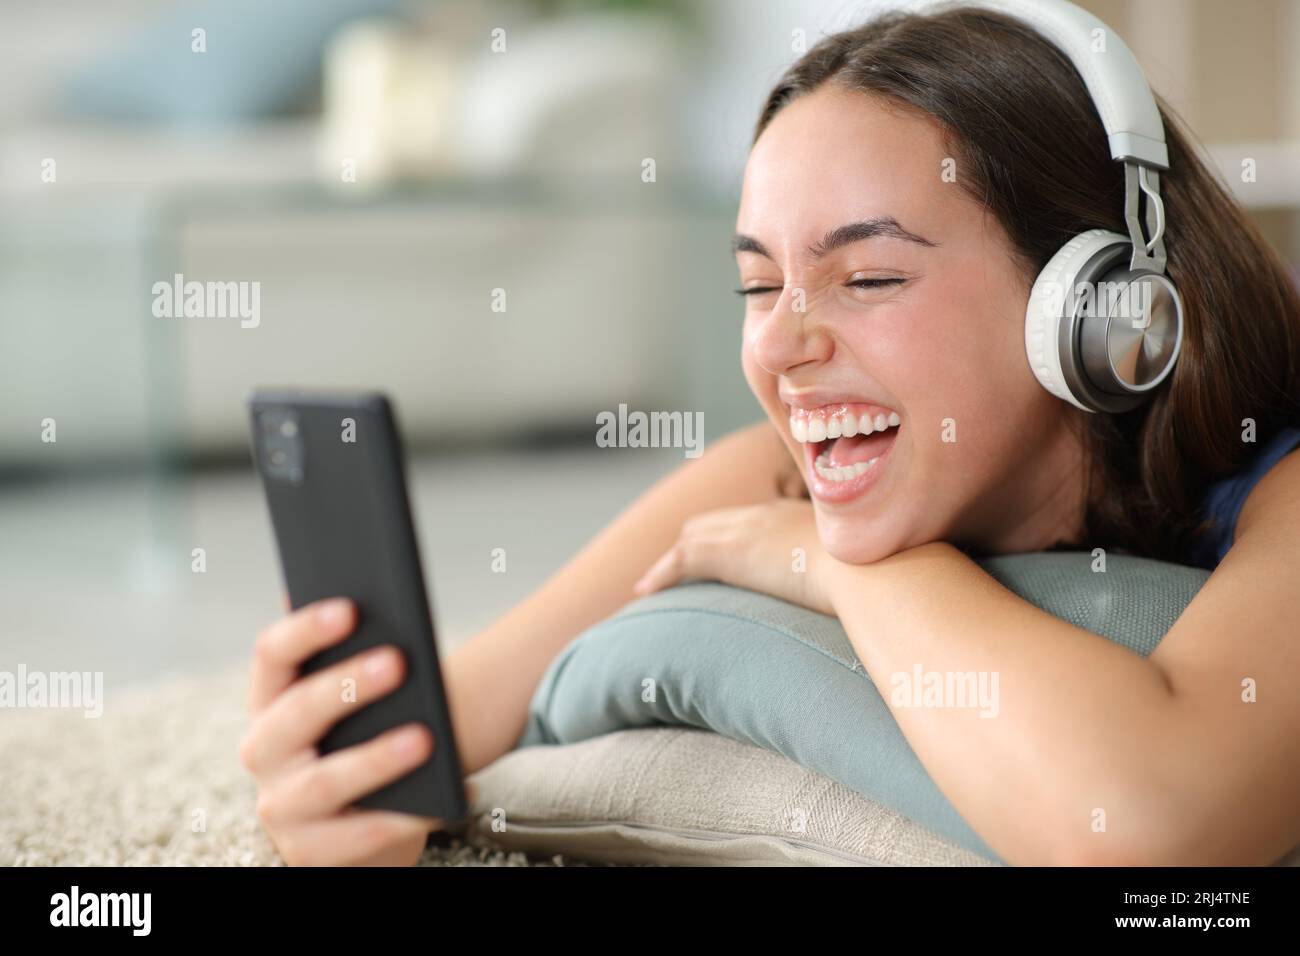 Happy woman wearing headphone watching videos laughing loud lying on the floor at home Stock Photo